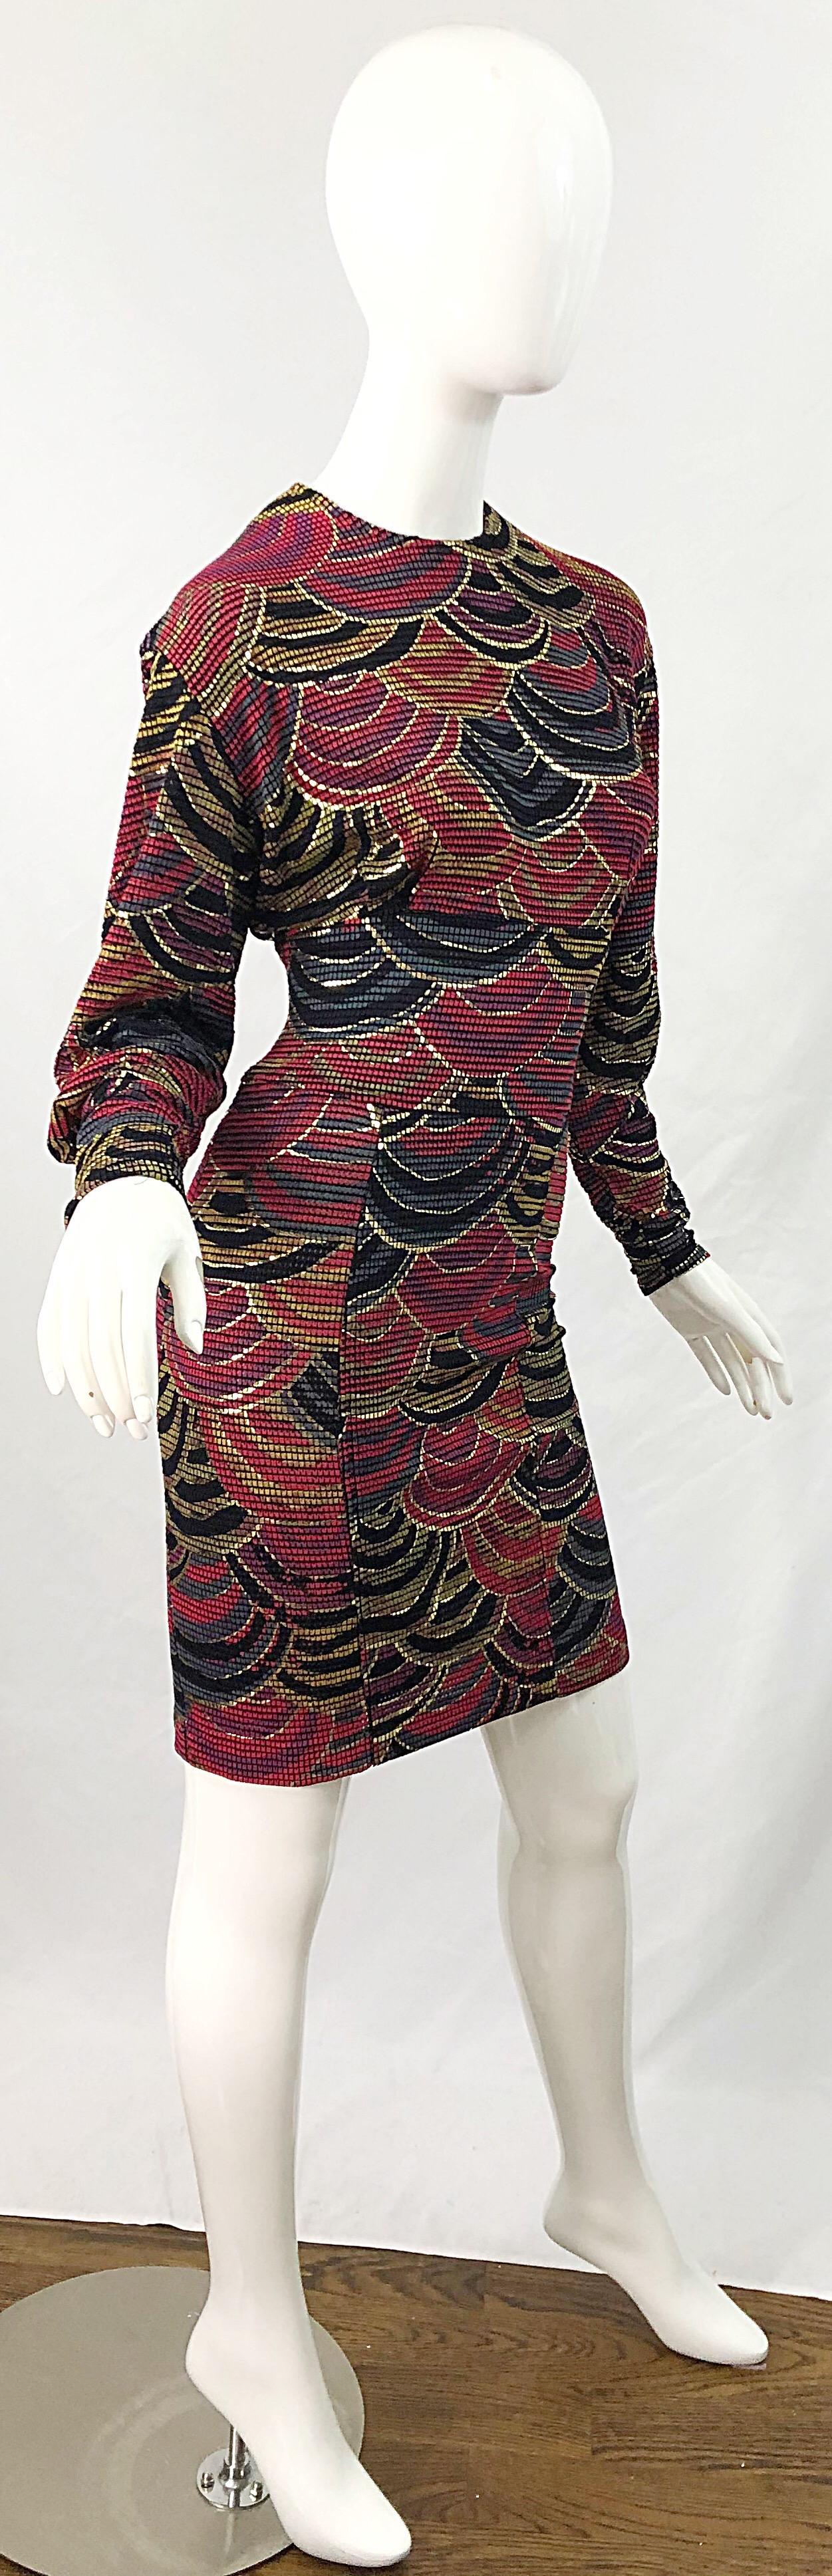 Women's 1980s Hand Painted Reversible Red + Gold + Green Vintage 80s Avant Garde Dress For Sale